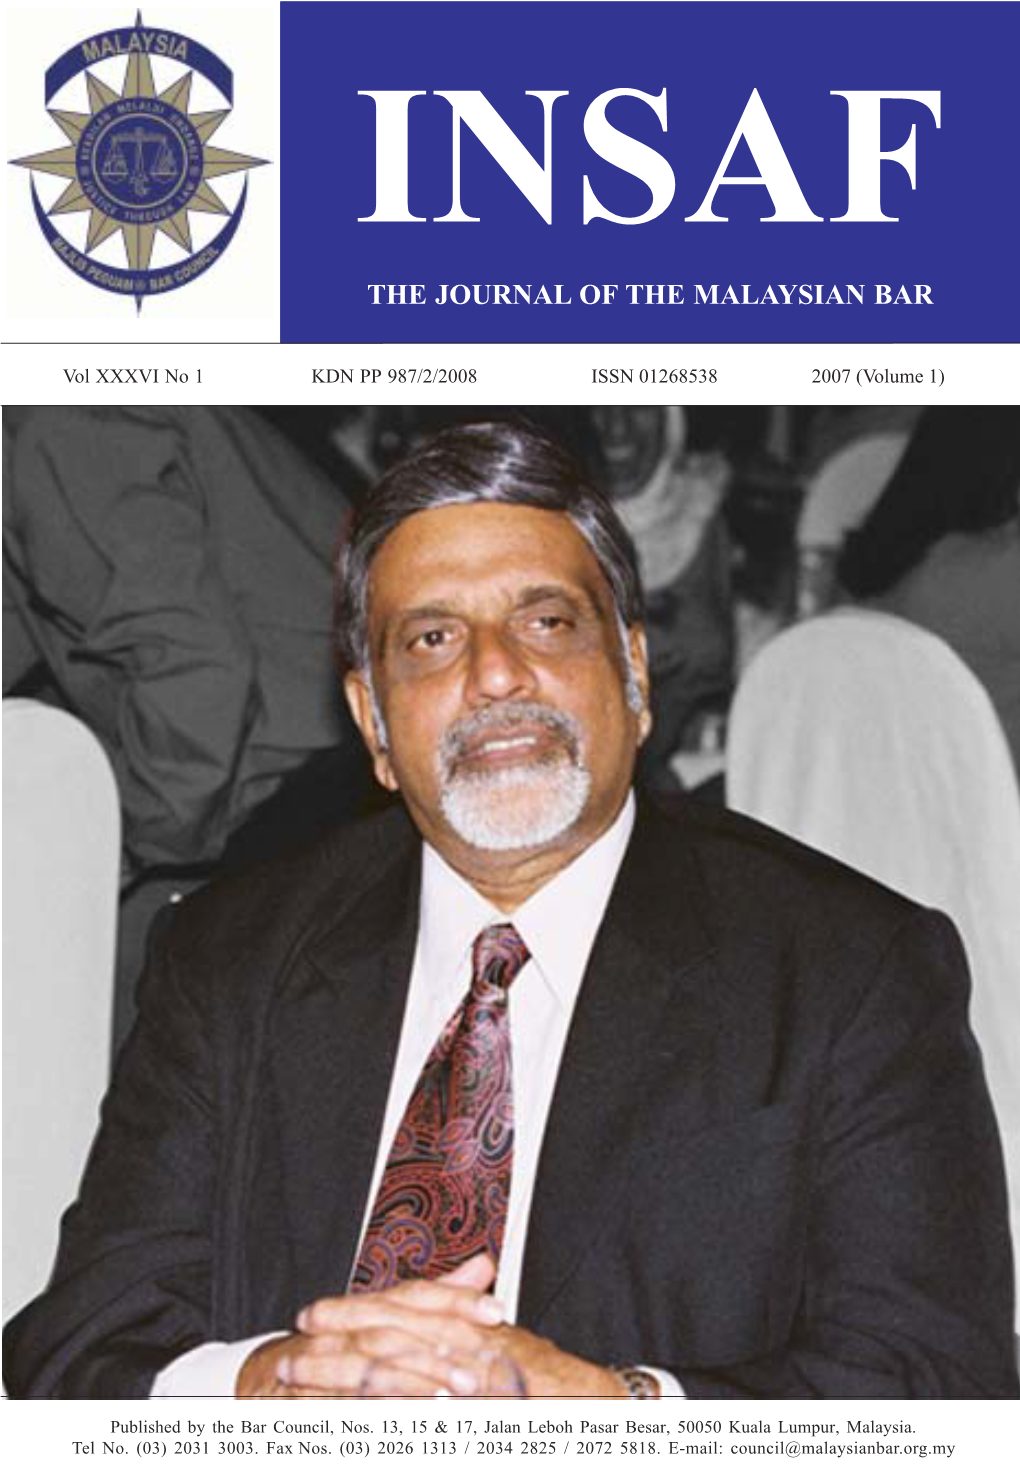 The Journal of the Malaysian Bar